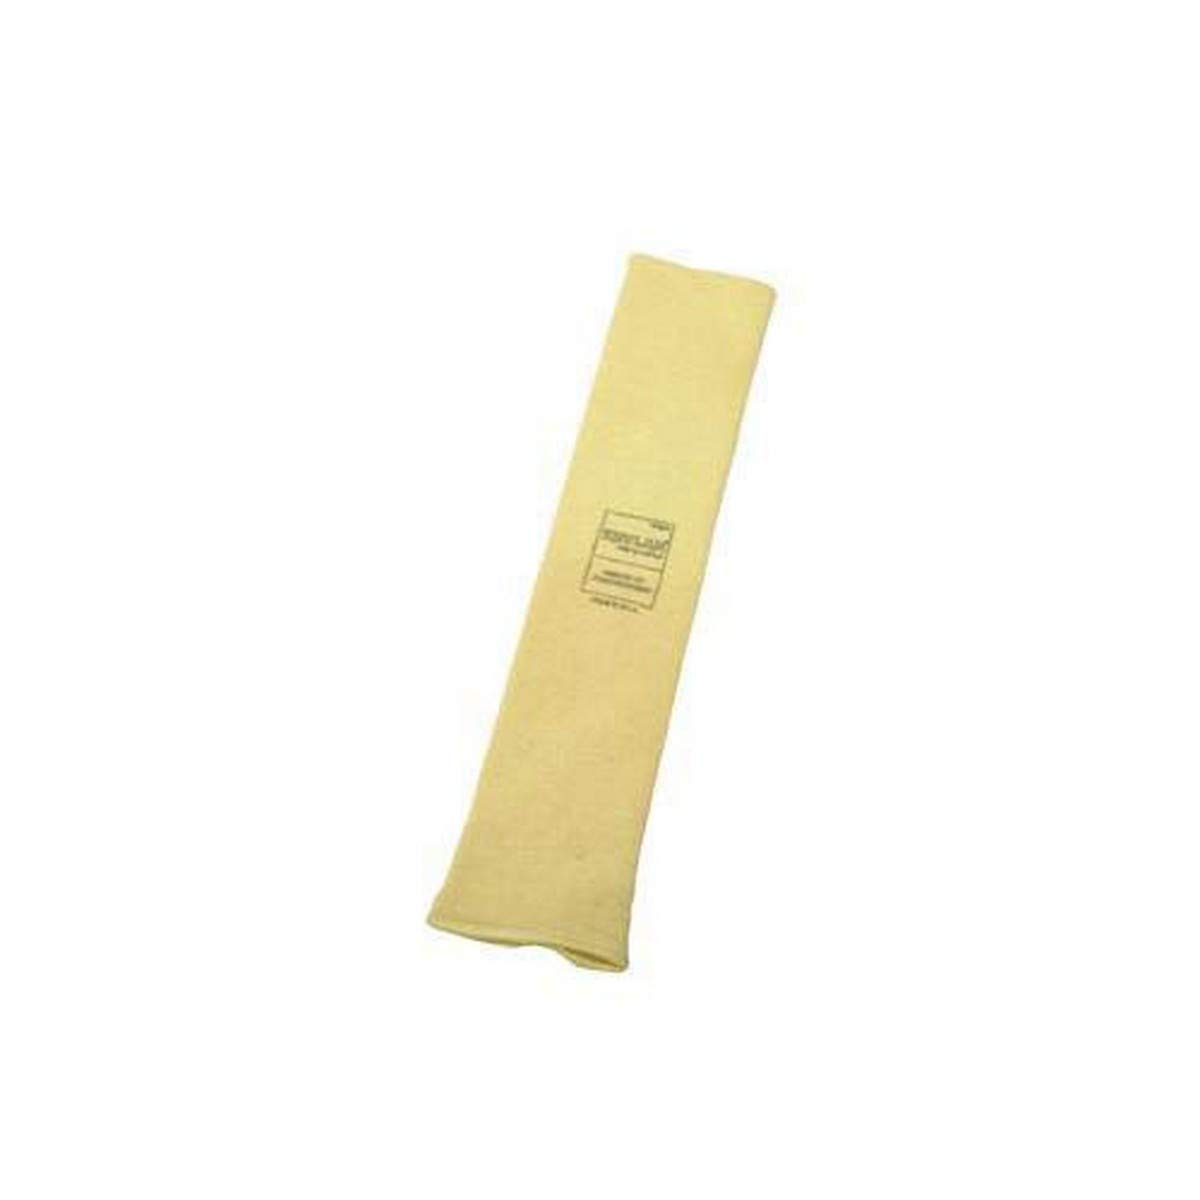 SLEEVE, PROTECTIVE, 24"2 PLY, 100% KEVLAR